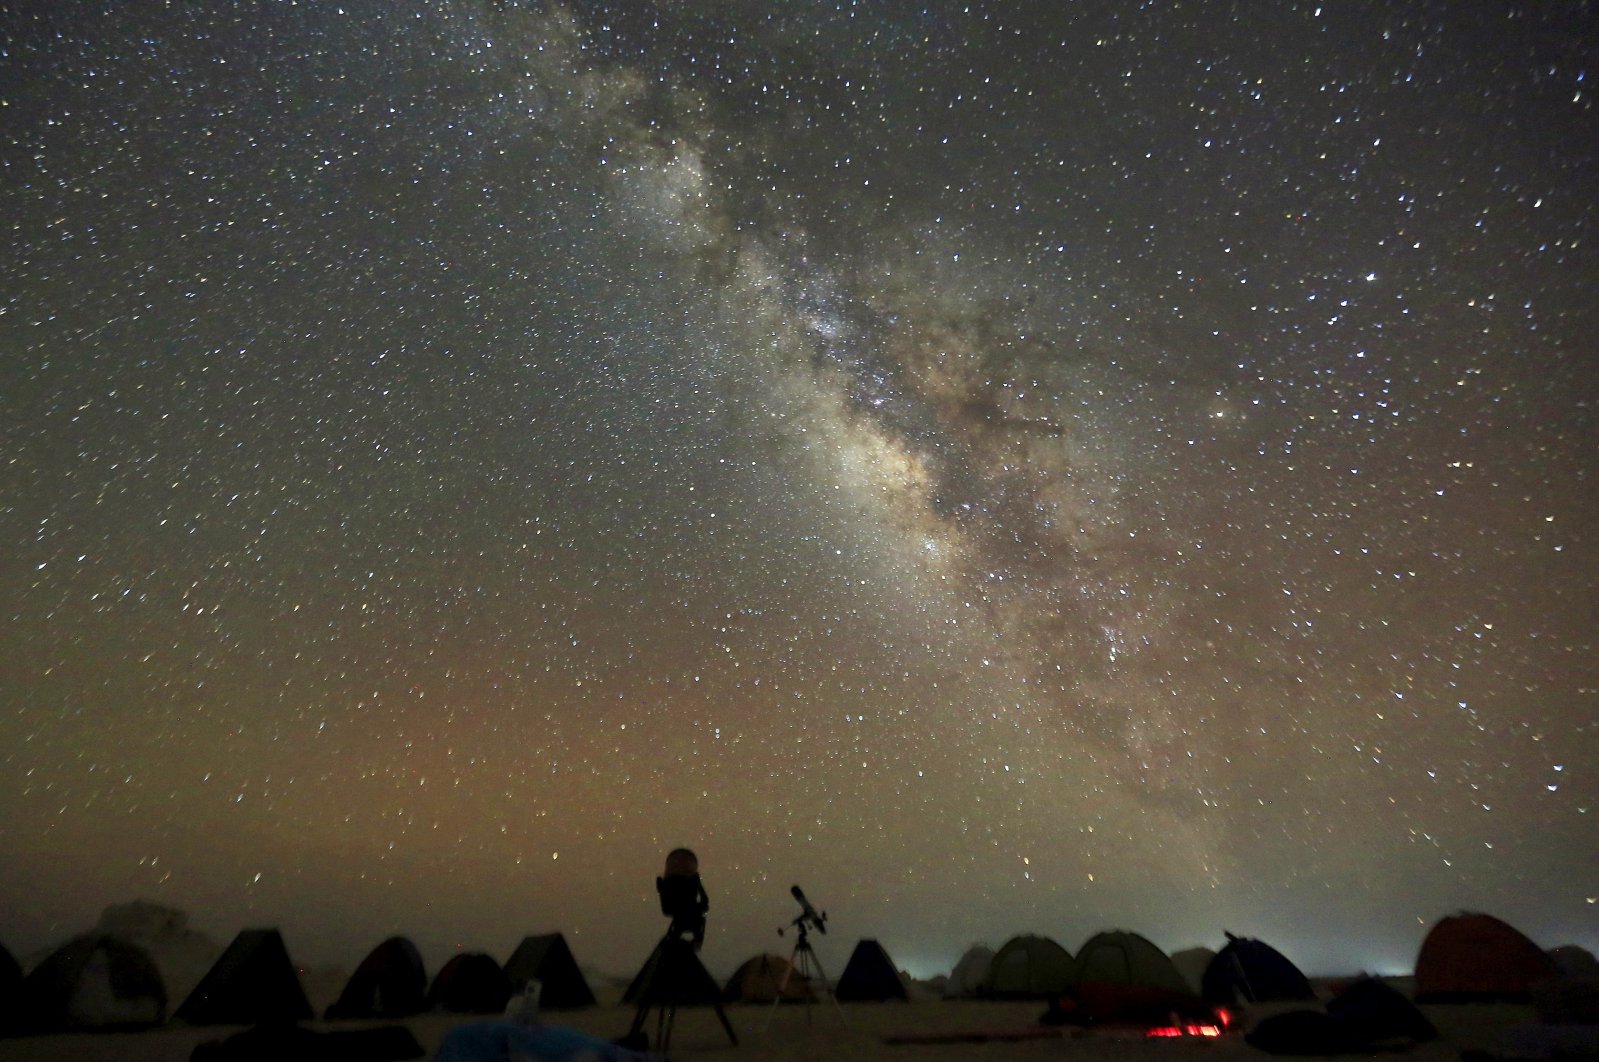 The Milky Way is seen in the night sky around telescopes and camps of people over rocks in the White Desert north of the Farafra Oasis, southwest of Cairo, Egypt, May 16, 2015. (Reuters Photo)